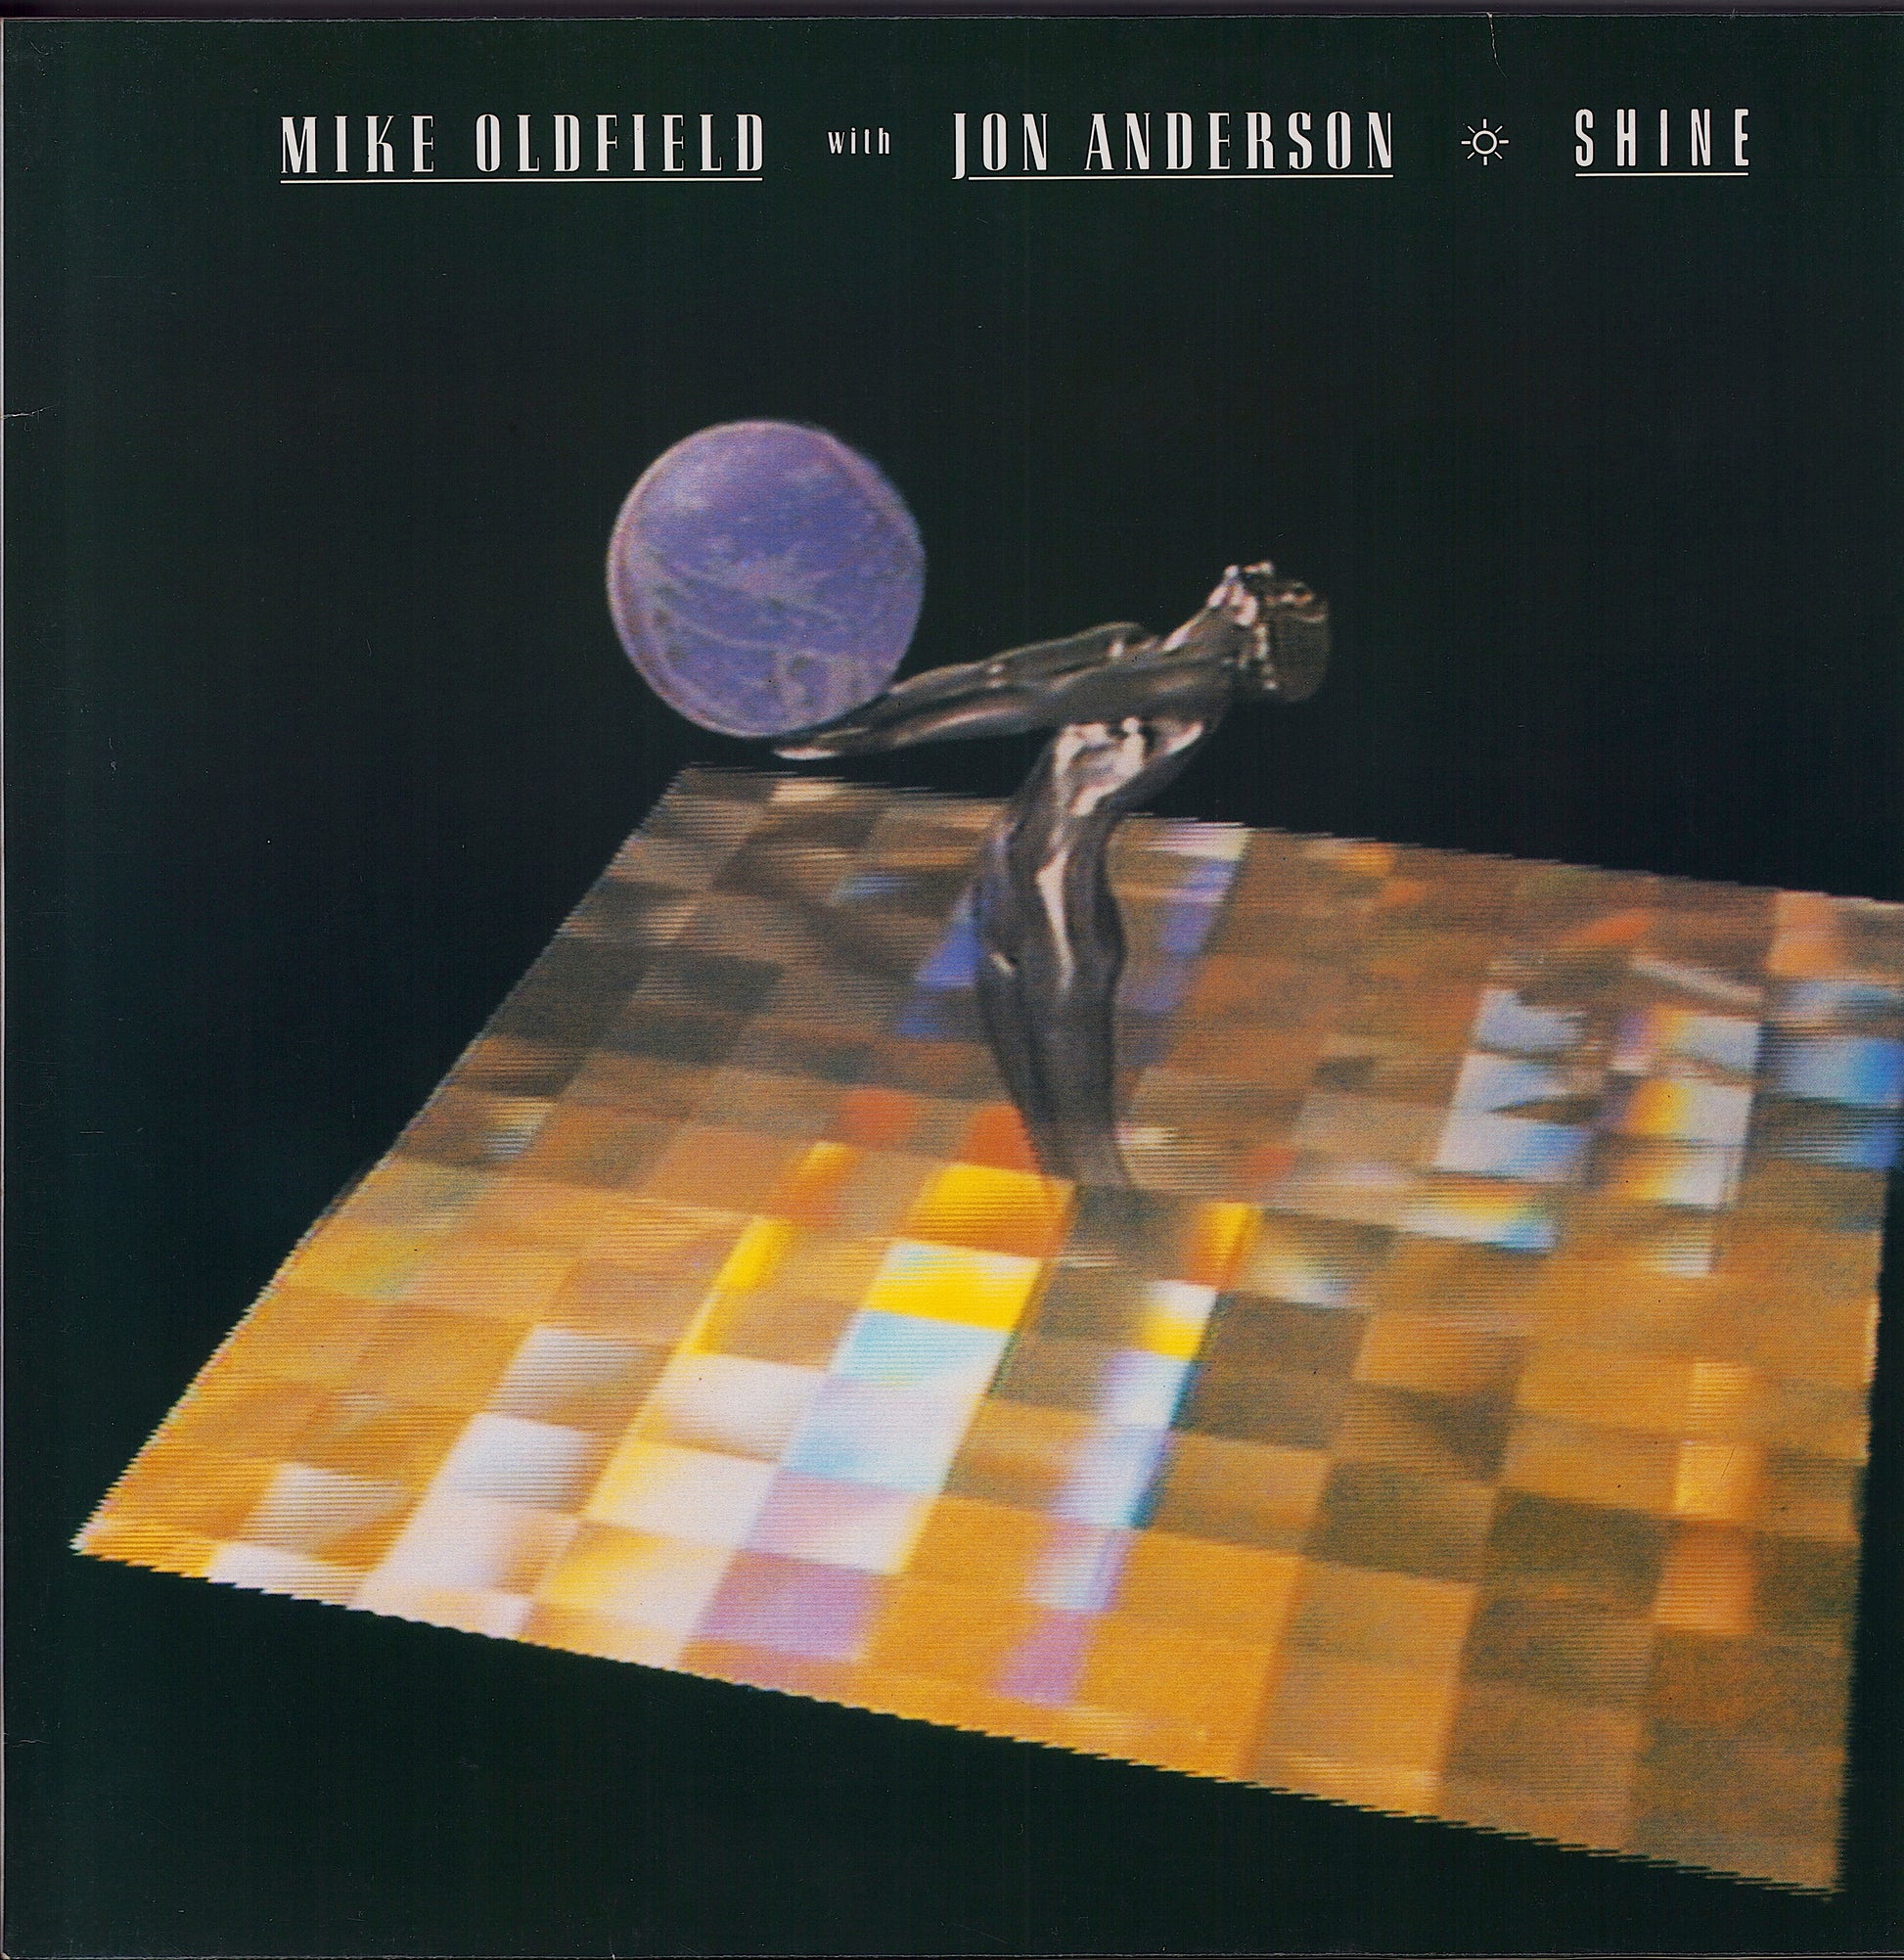 Mike Oldfield With Jon Anderson ‎- Shine (Vinyl 12")